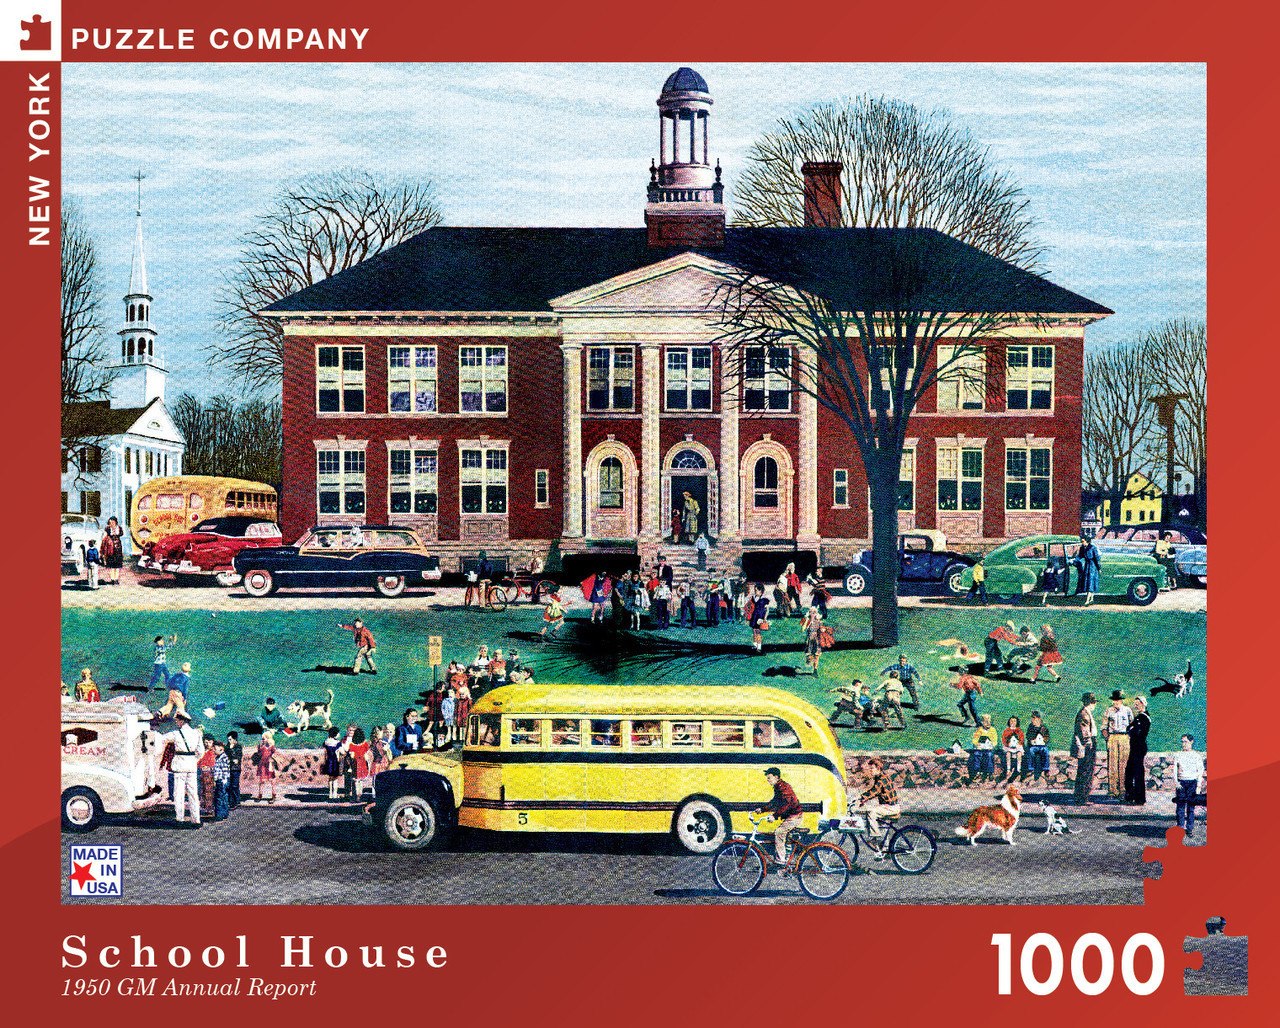 School House - 1000pc Jigsaw Puzzle by New York Puzzle Company - image 1